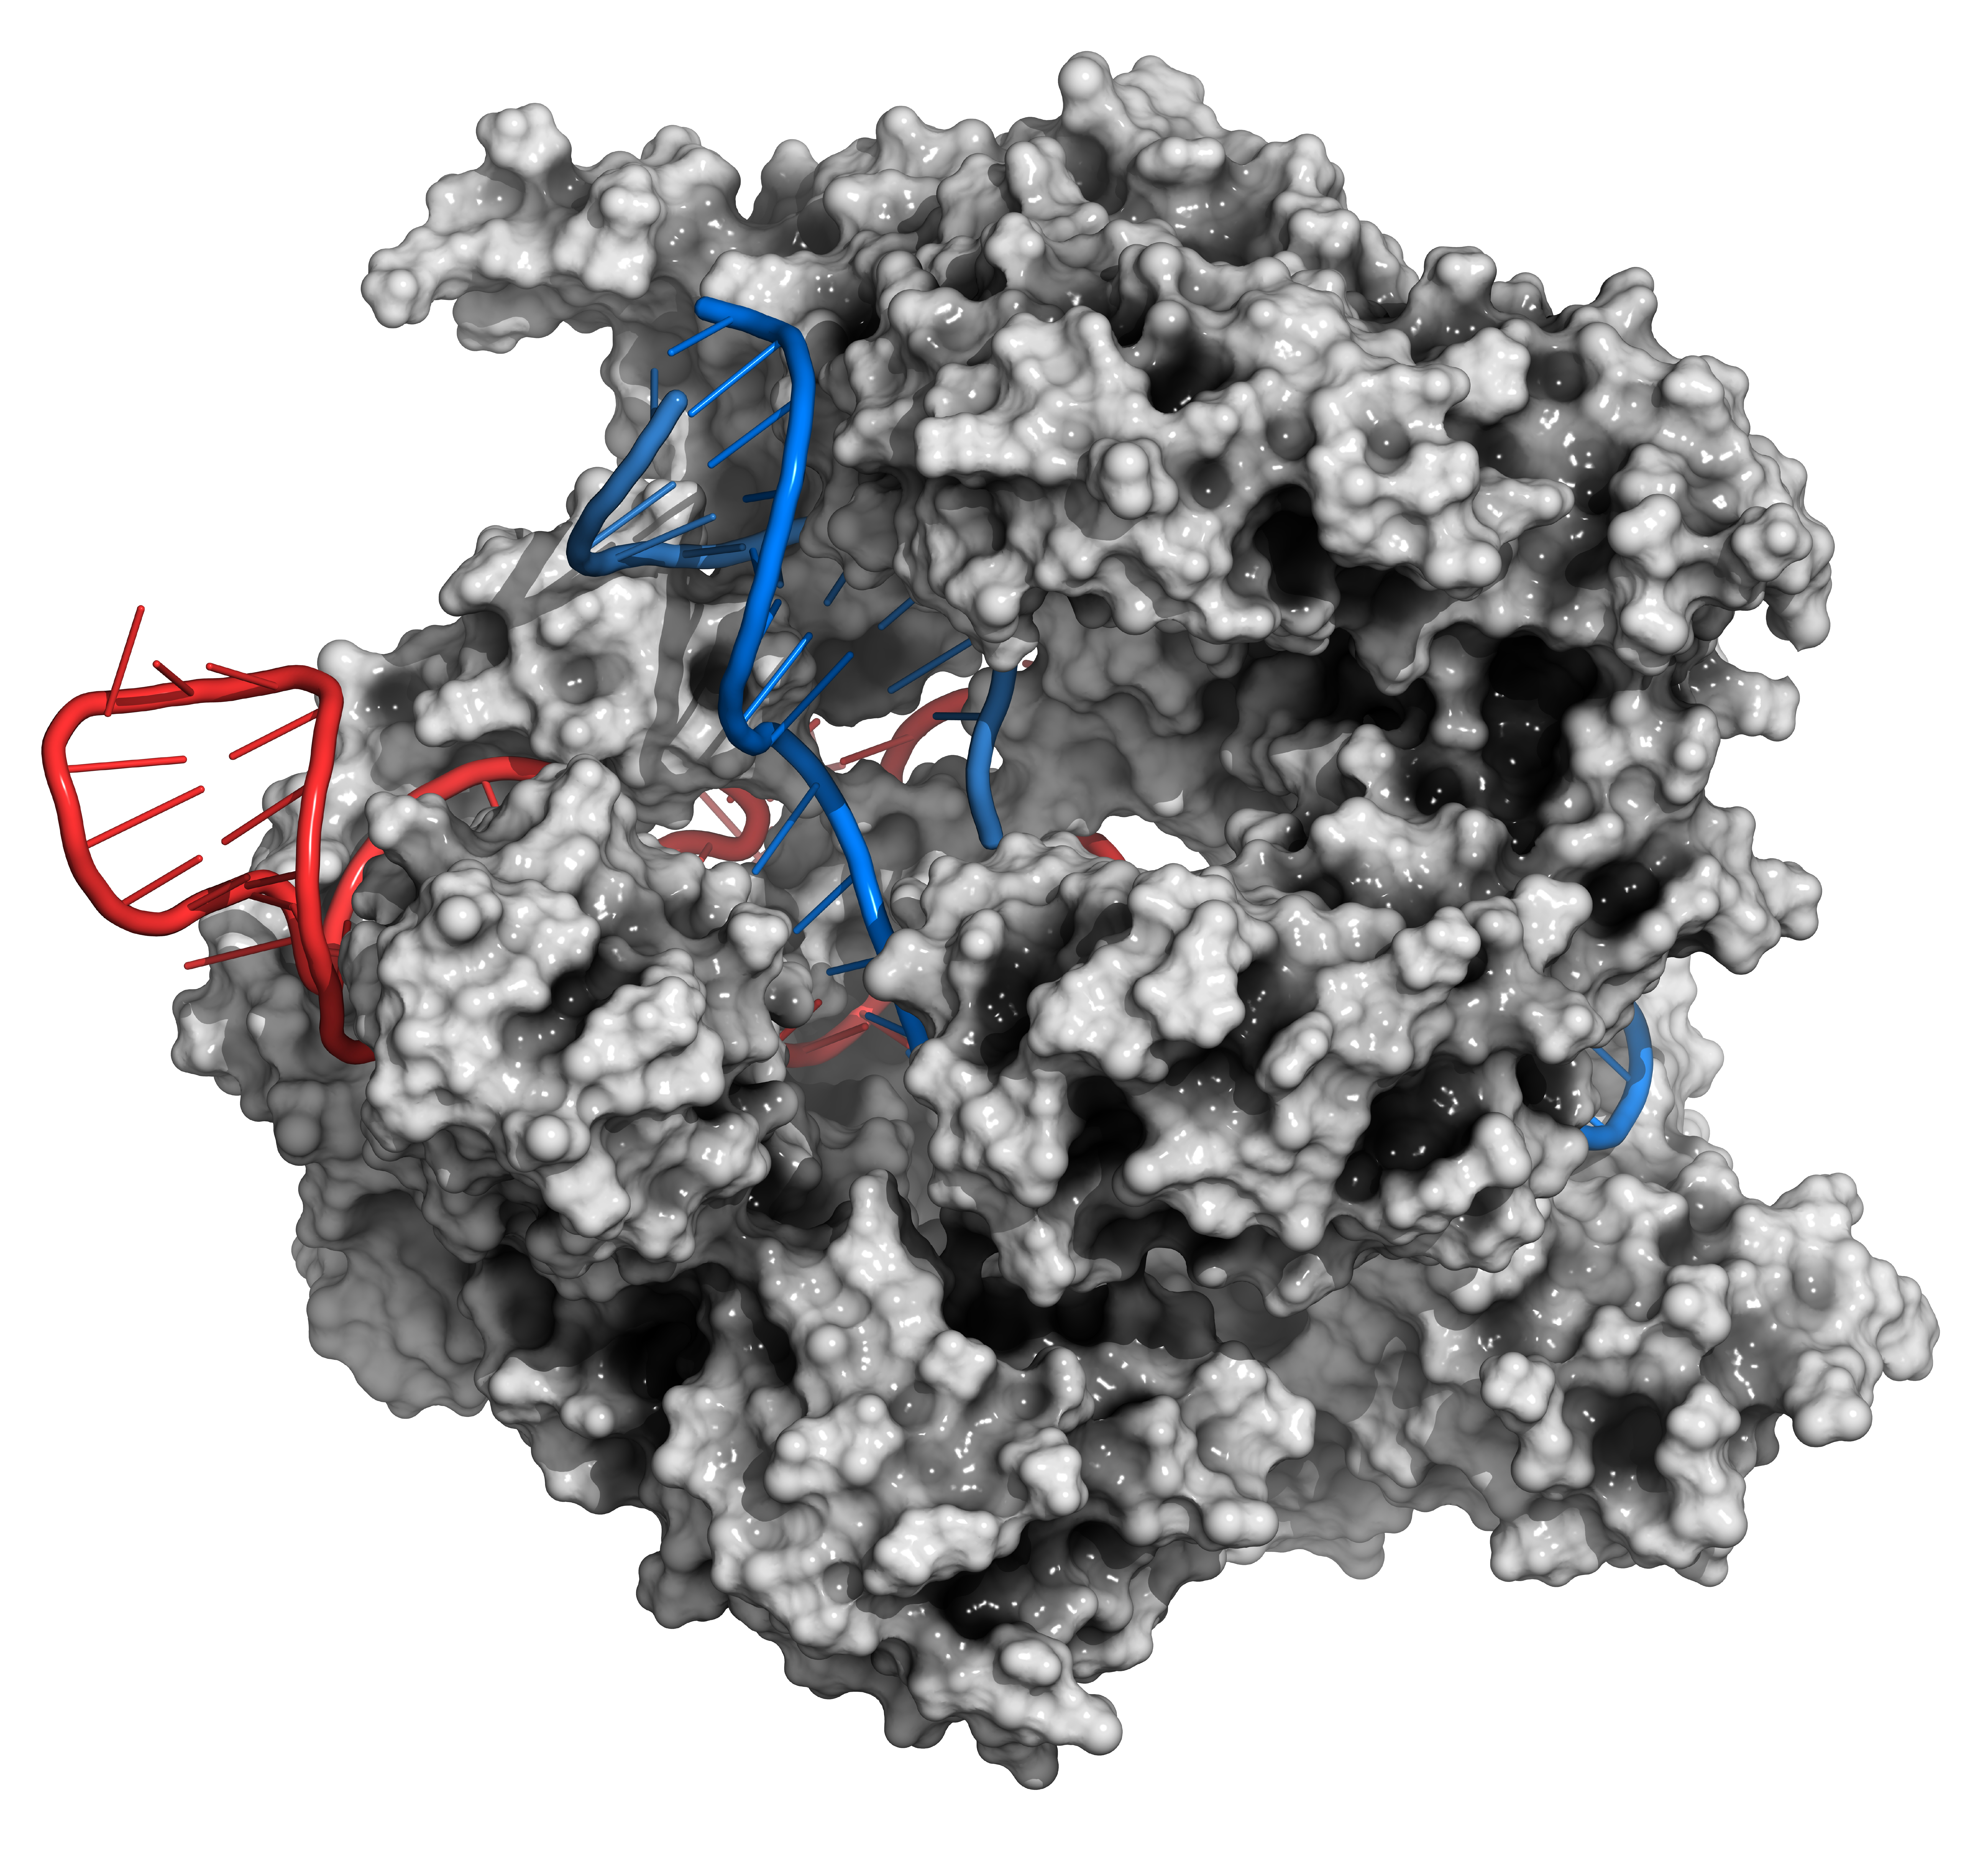 CRISPR-CAS9 gene editing complex from Streptococcus pyogenes. The Cas9 nuclease protein uses a guide RNA sequence to cut DNA at a complementary site. Cas9 protein: white surface model. DNA fragments: blue ladder cartoon. RNA: red ladder cartoon.